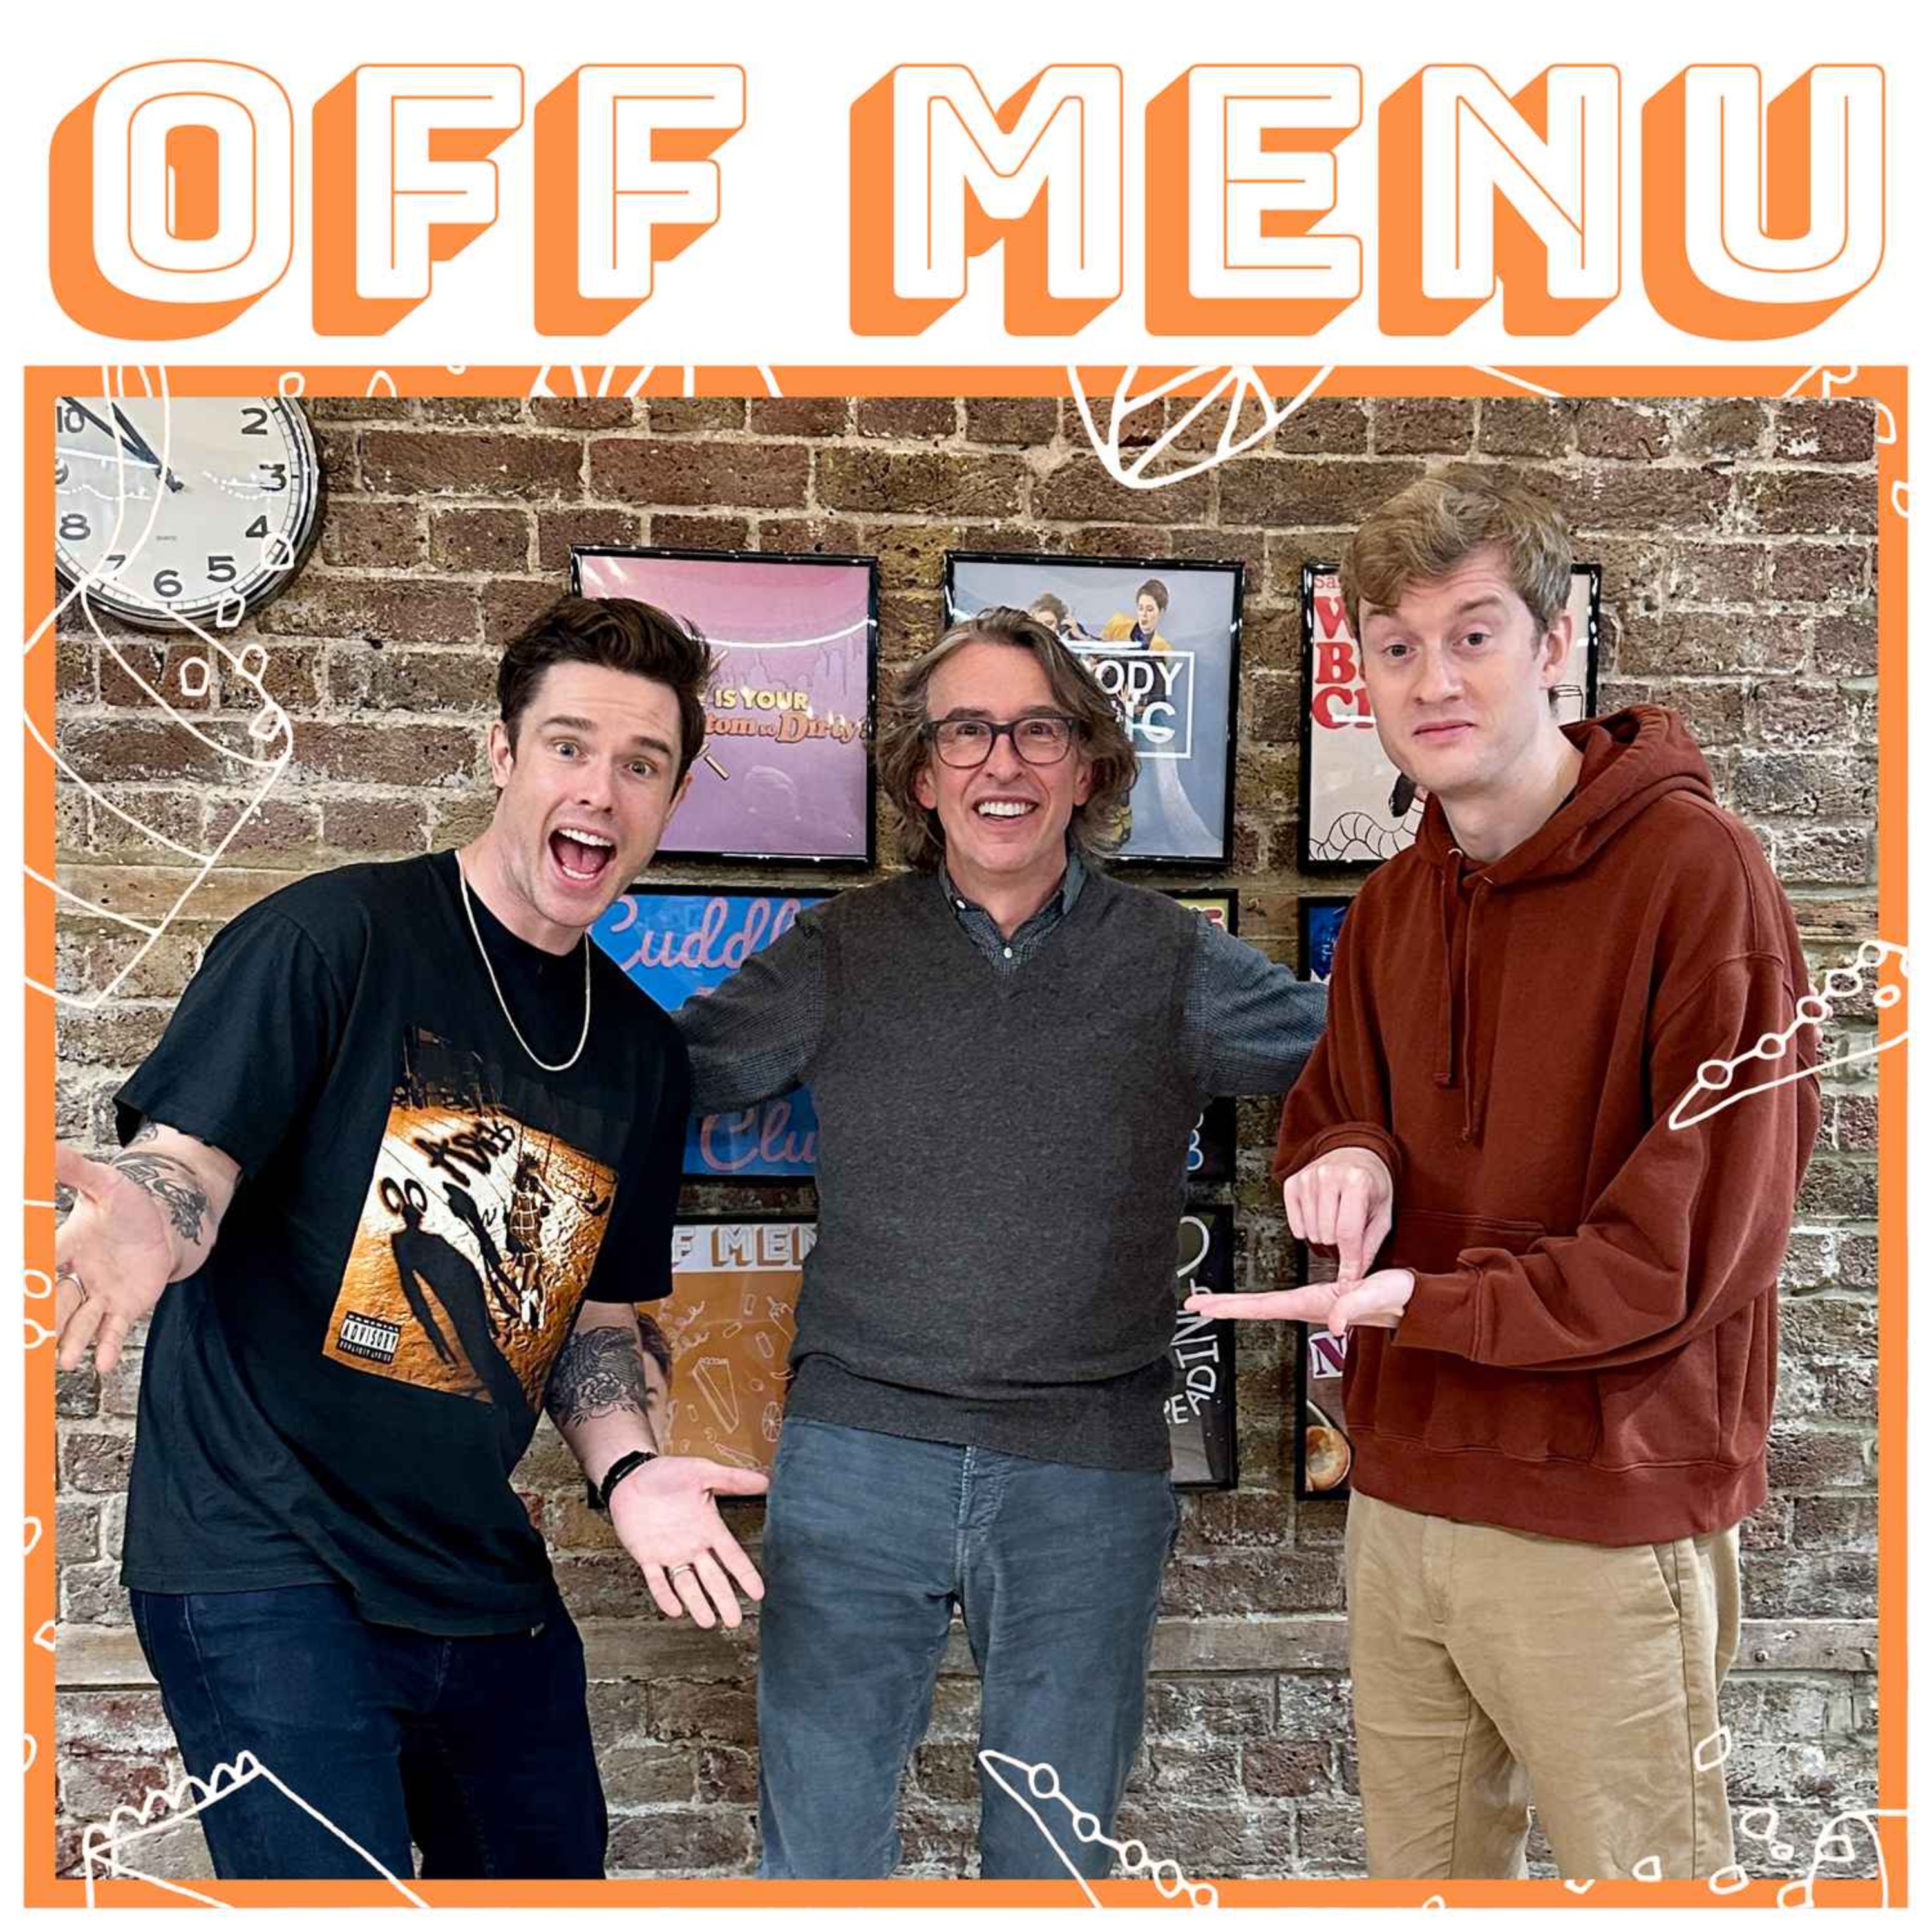 Ep 211: Steve Coogan - Off Menu with Ed Gamble and James Acaster | Acast